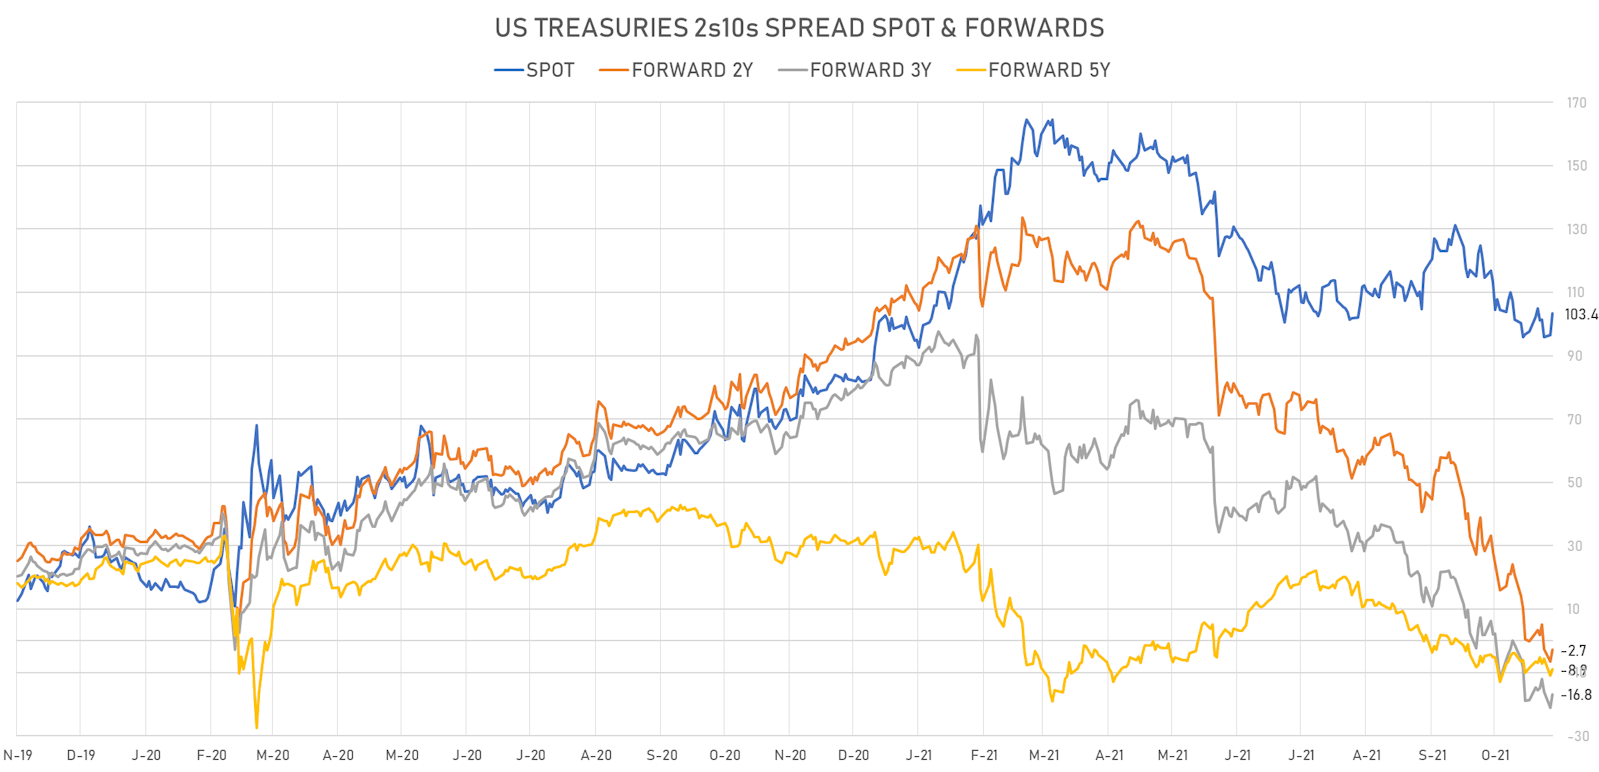 US Treasury Curve 2s10s Spread Spot & Forward (Derived From The UST ZC Curve) | Sources: ϕpost, Refinitiv data